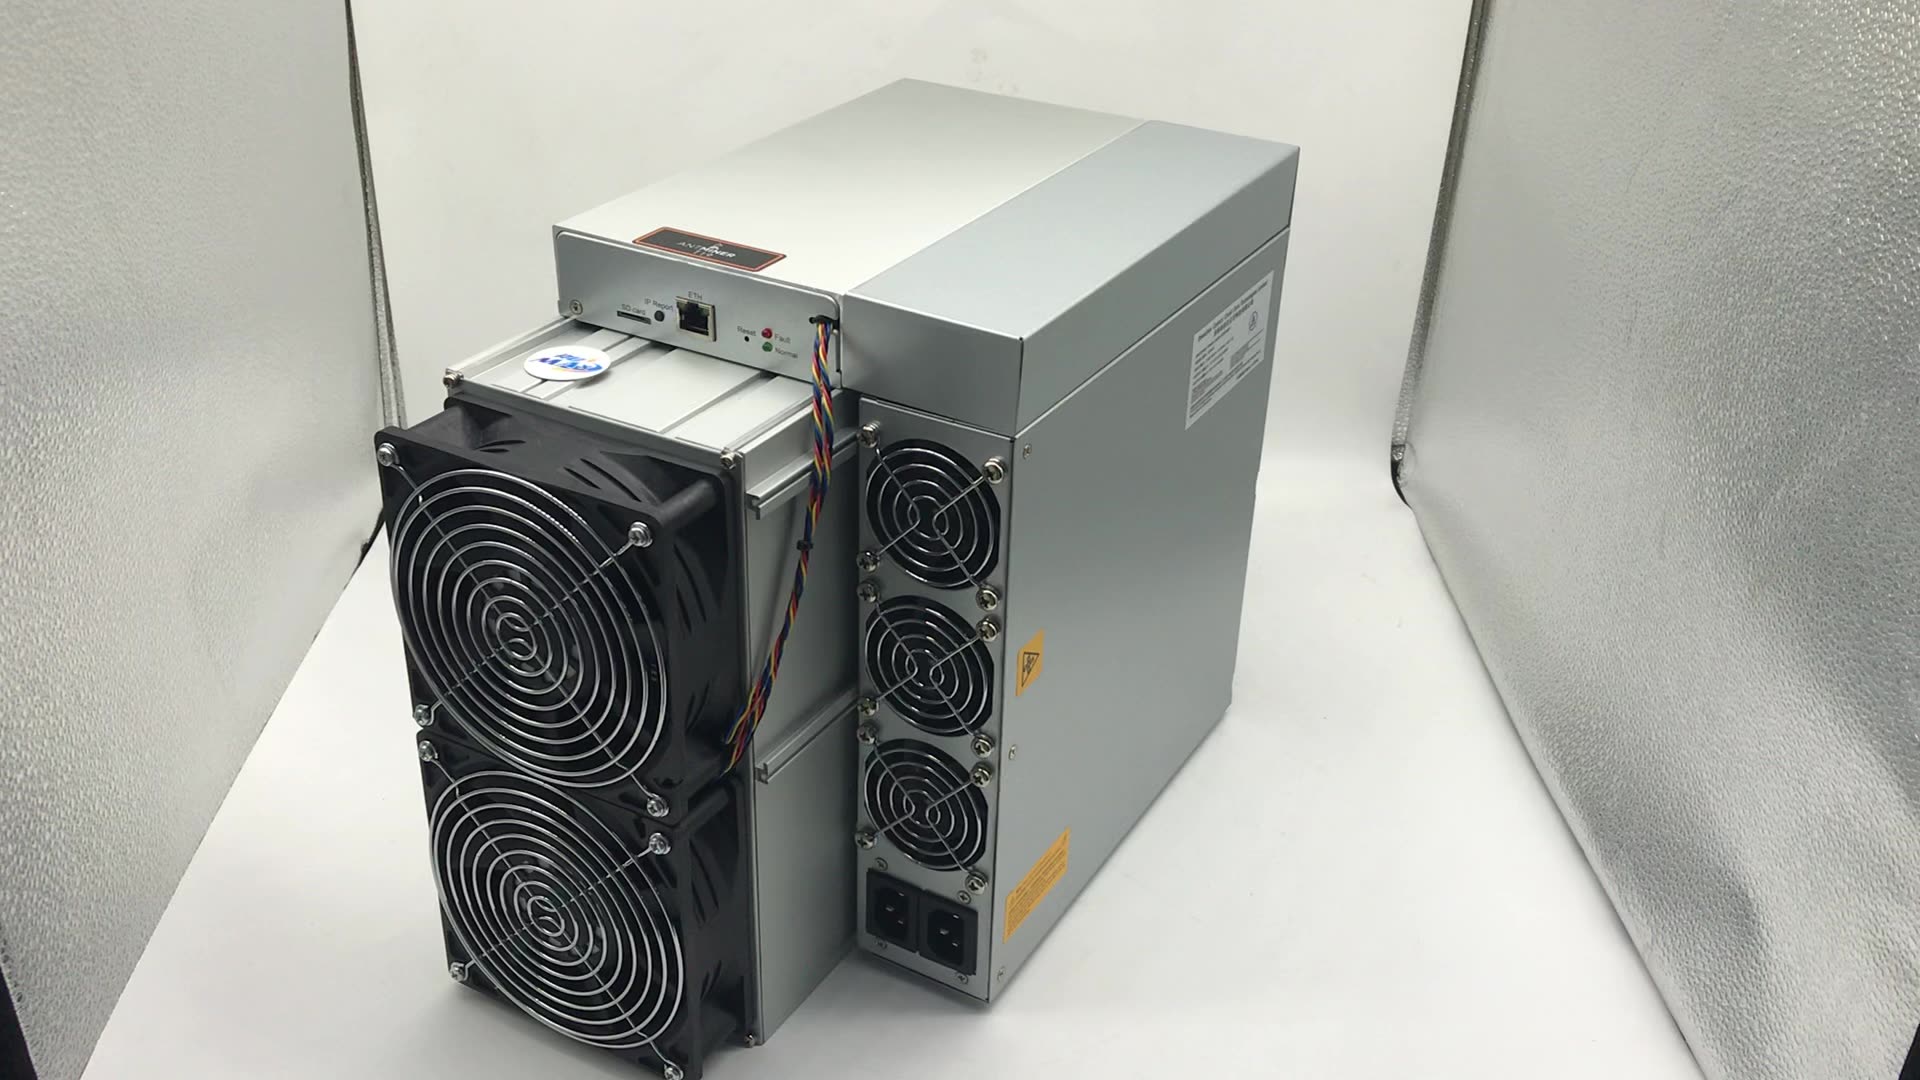 Antminer l7 9500 mh s. Antminer t19. S19j Pro 100th Antminer. Асик s19 Pro.